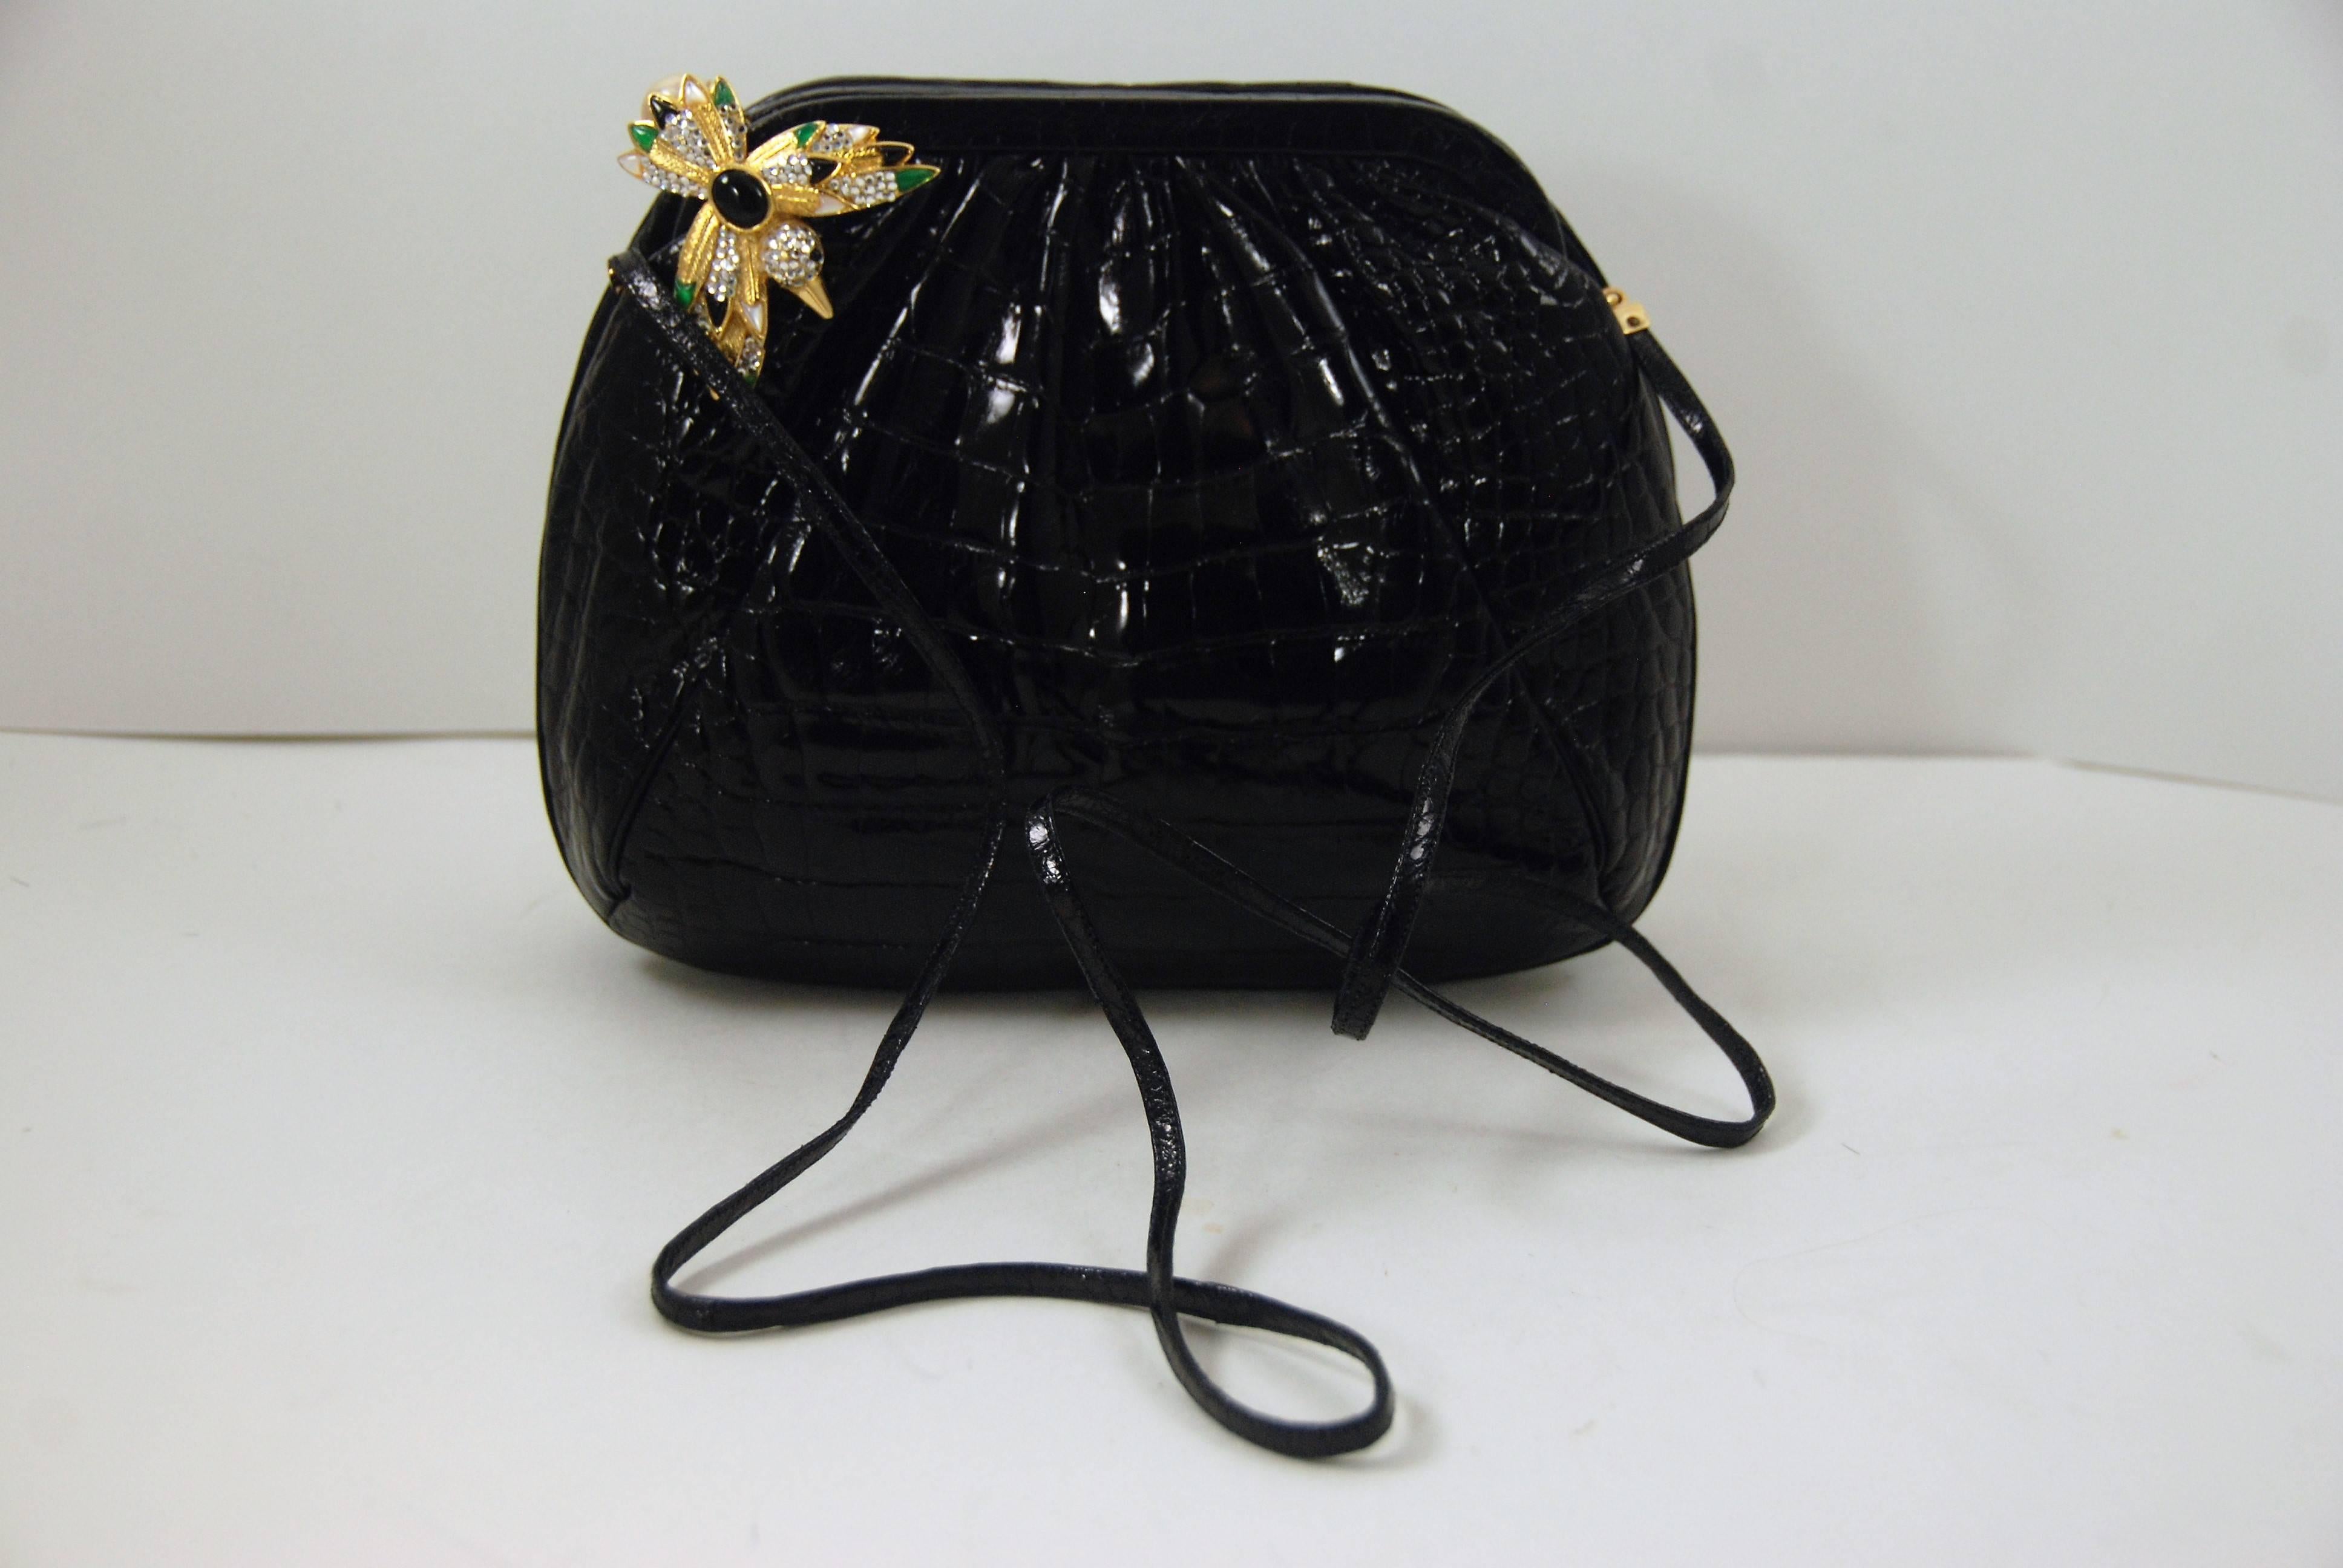 1980s Judith Leiber Black Alligator Bag with Jeweled and Enamel Clasp 4